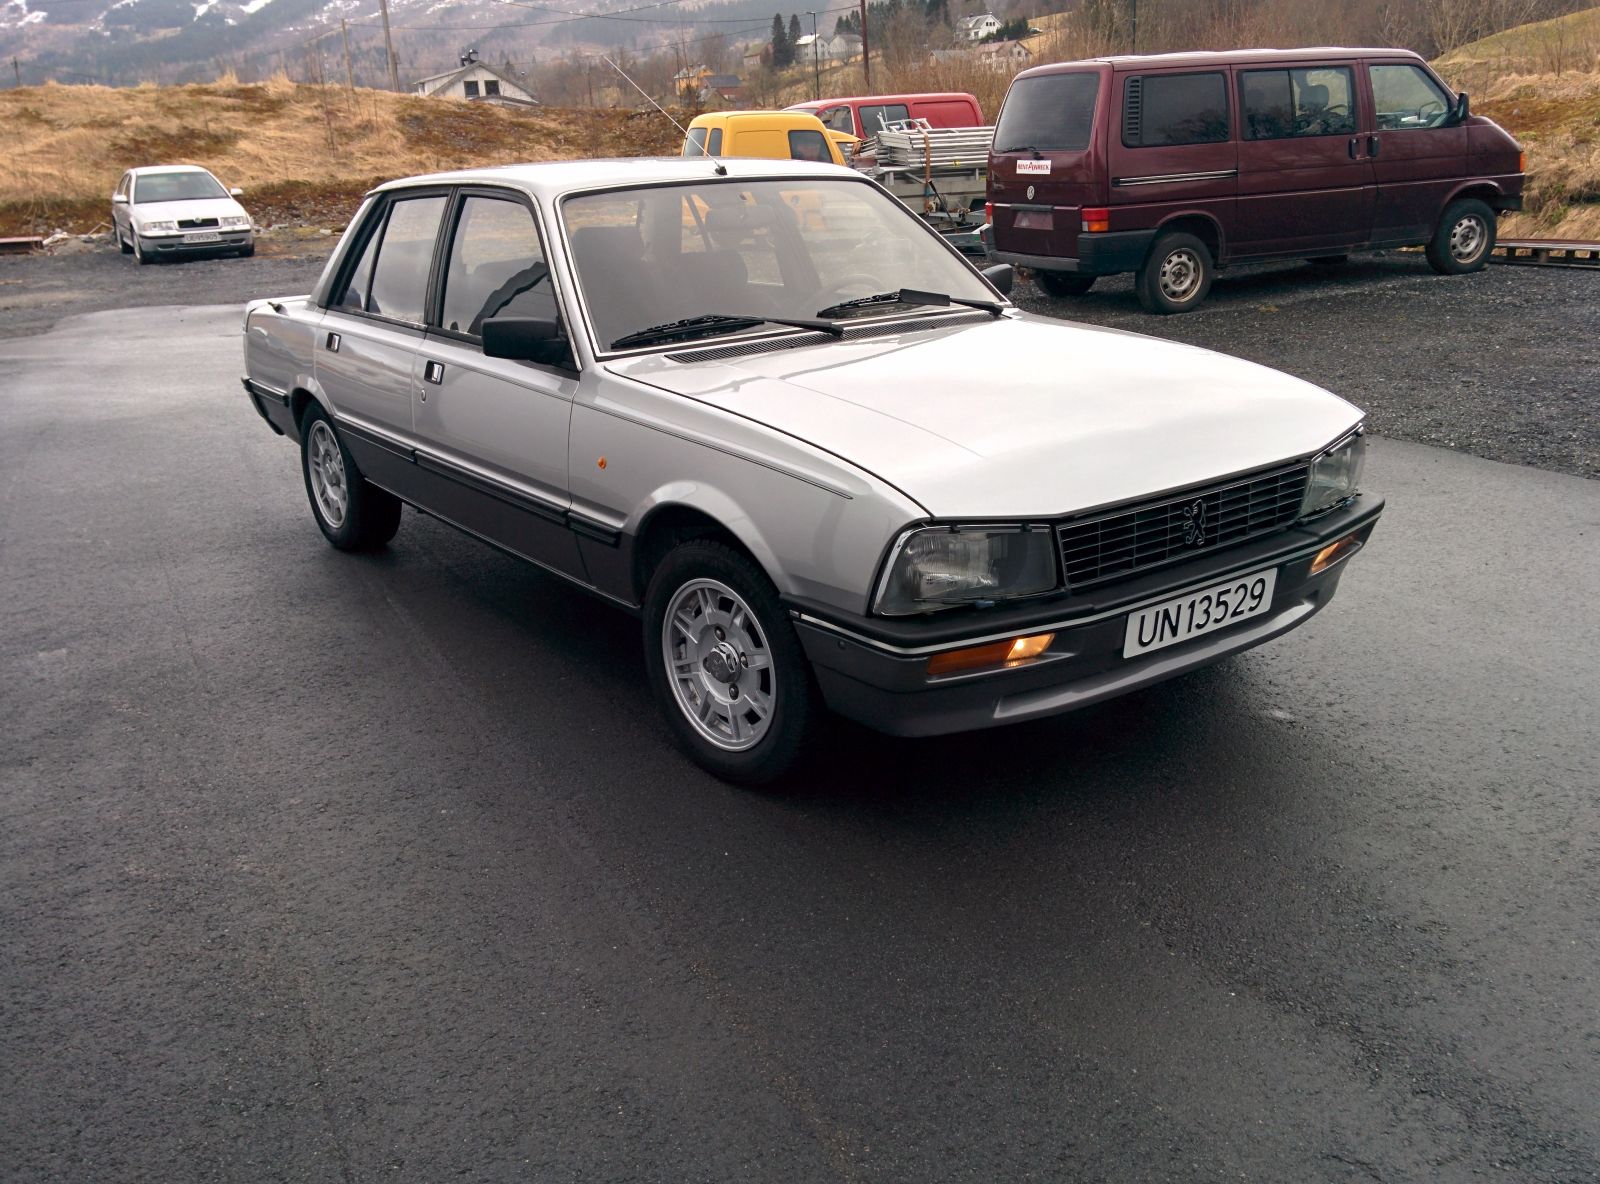 Robin's 1985 Peugeot 505 Turbo Injection